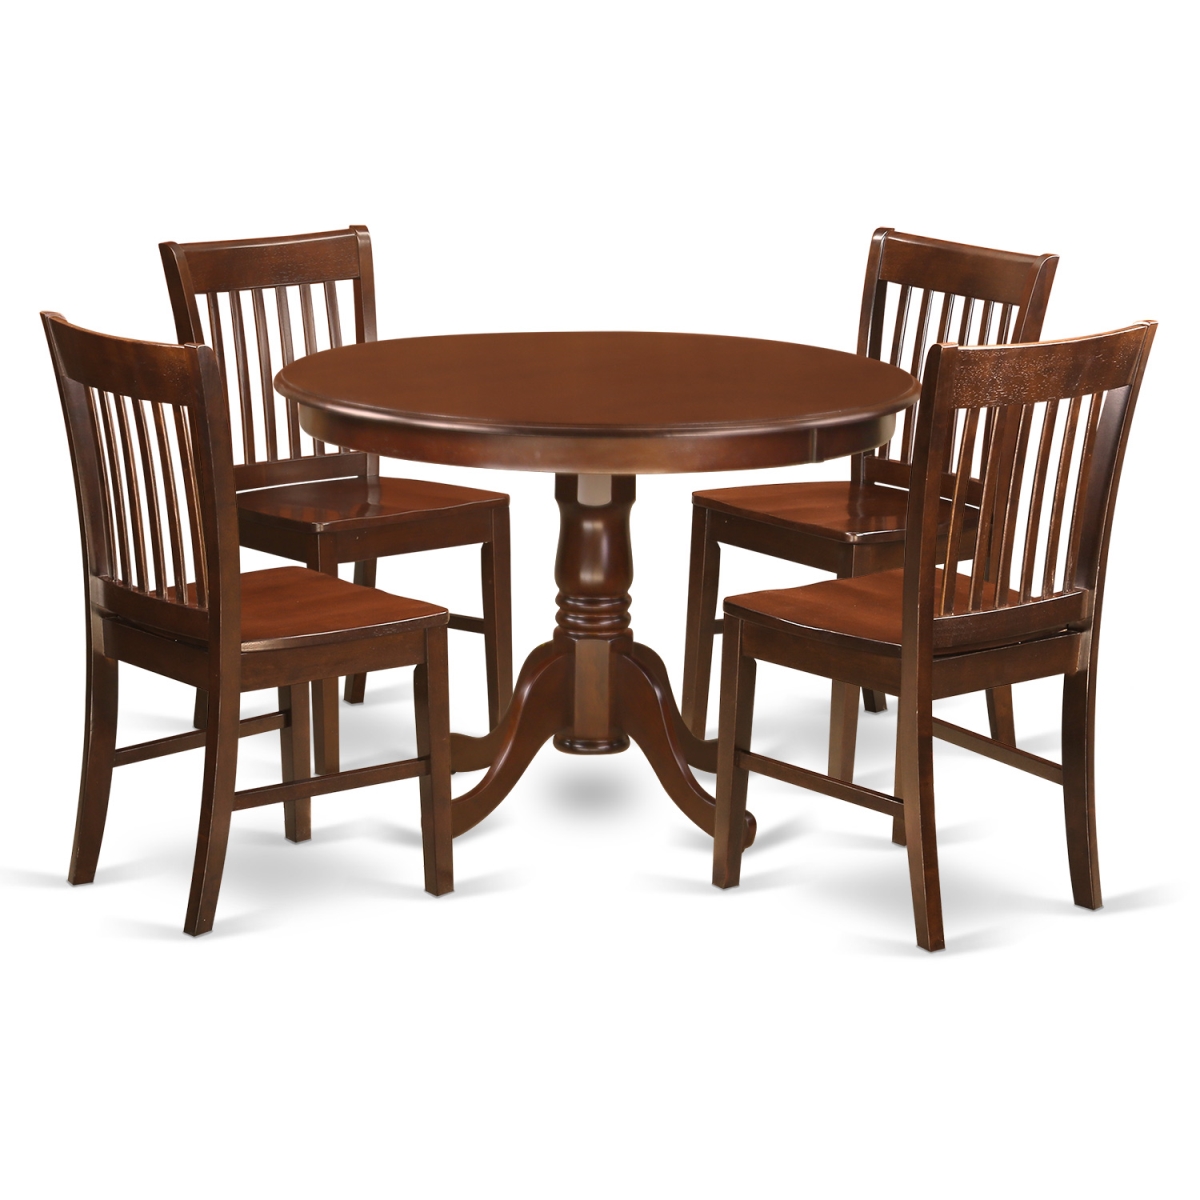 Picture of East West Furniture HLNO5-MAH-W Dining Set - One Round Small Table & 4 Chairs with Wood Seat&#44; Mahogany - 5 Piece - 42 in.